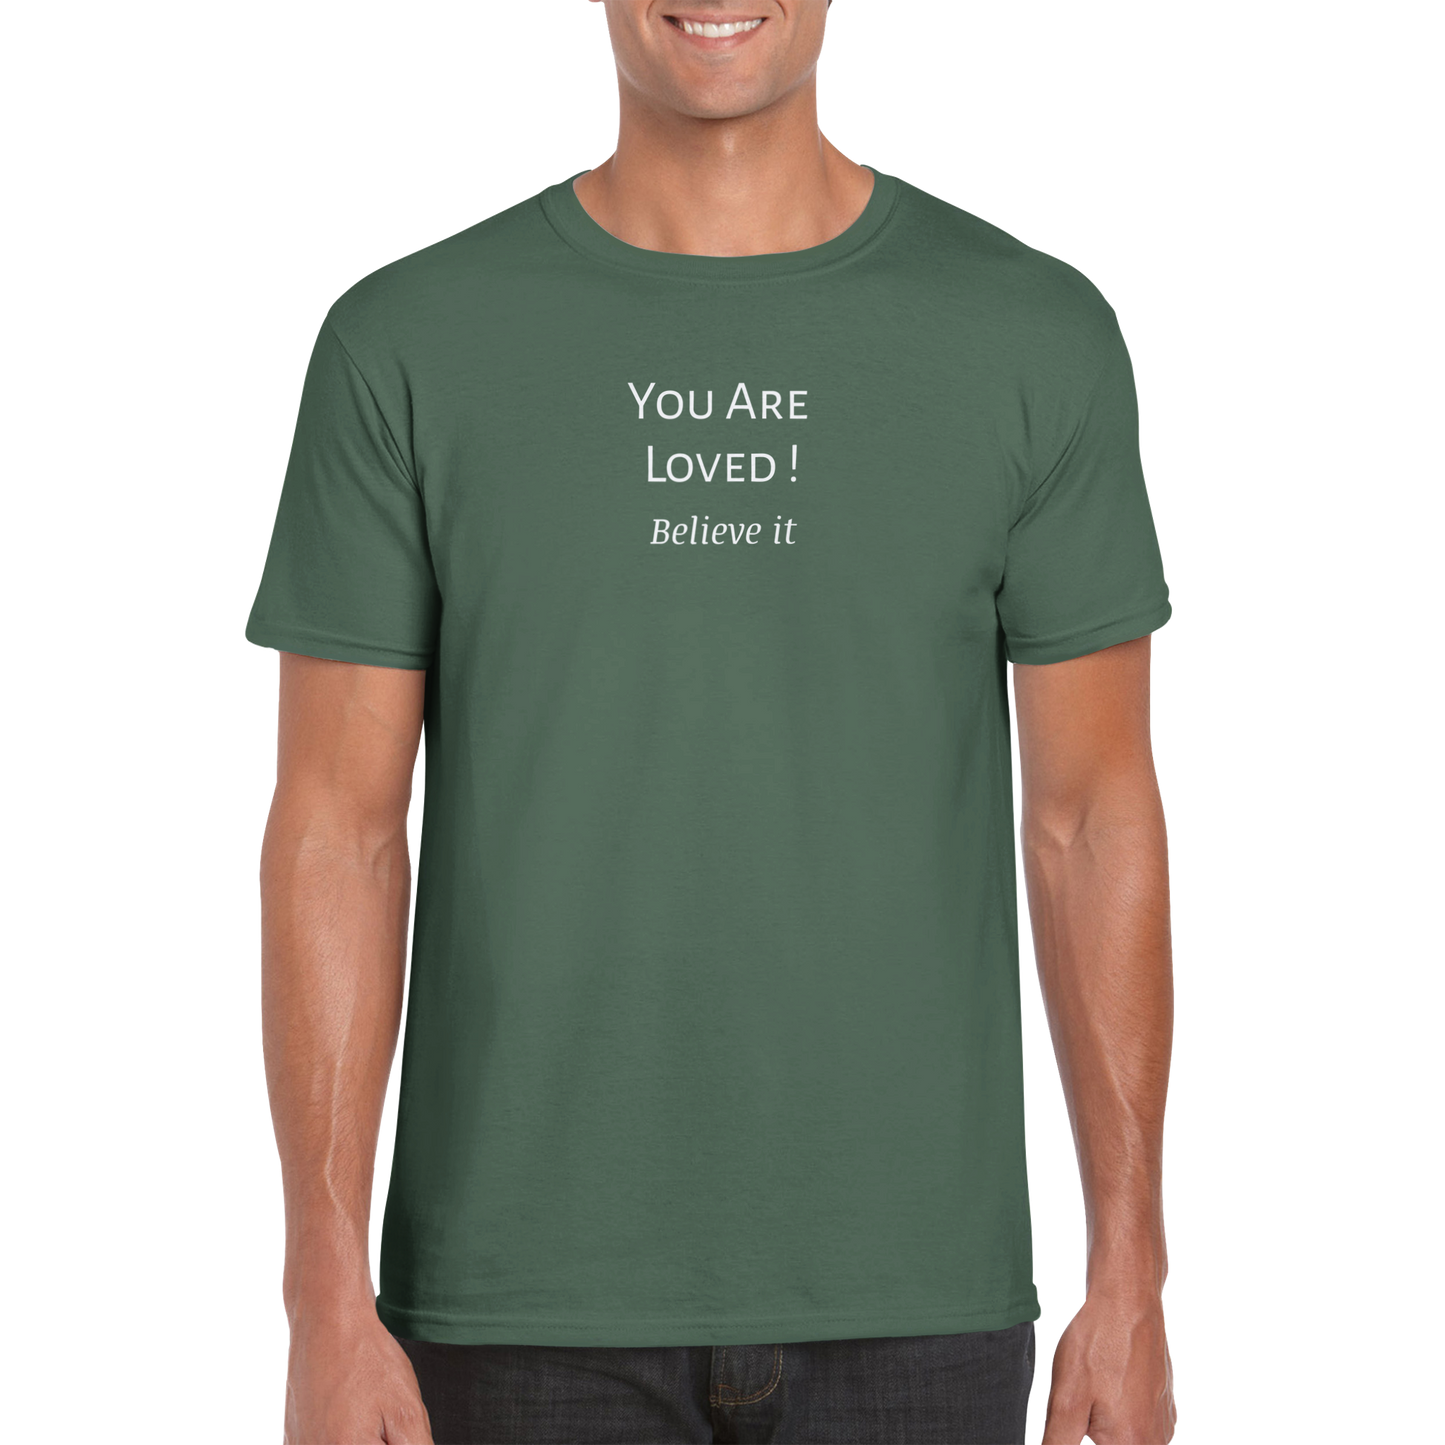 You Are Loved ! T-shirt. Wear it and share it forward.